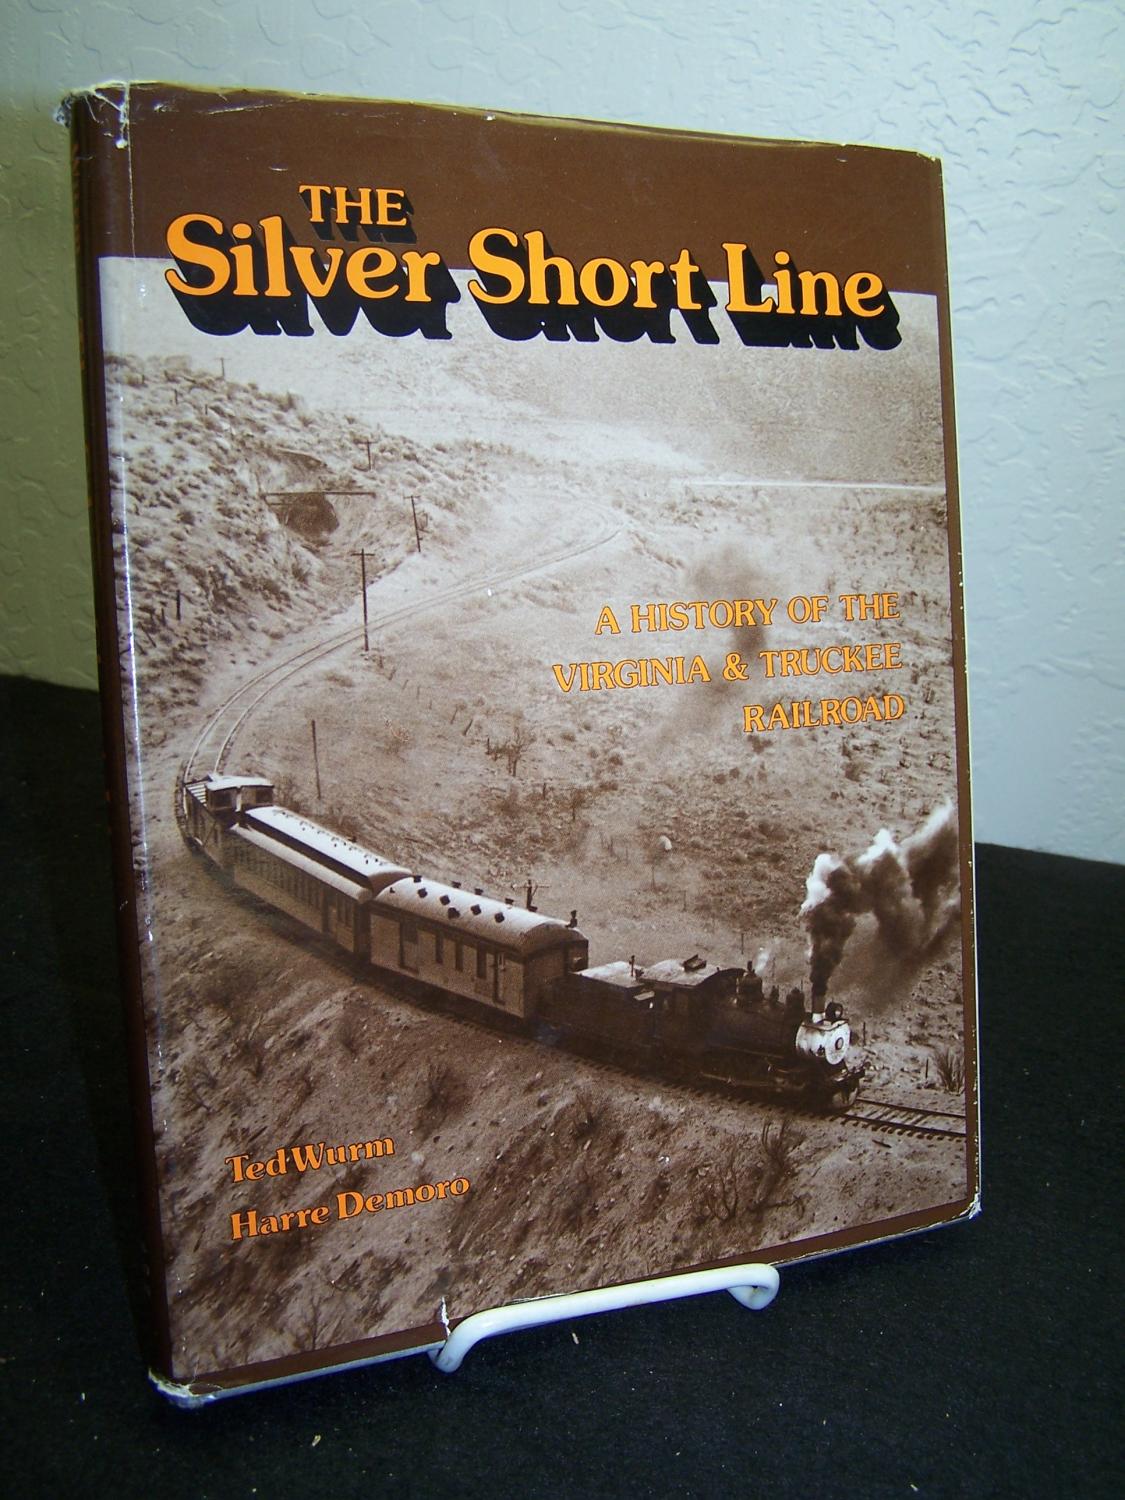 The Silver Short Line: A History of the Virginia & Truckee Railroad. - Wurm, Ted and Harre Demoro.